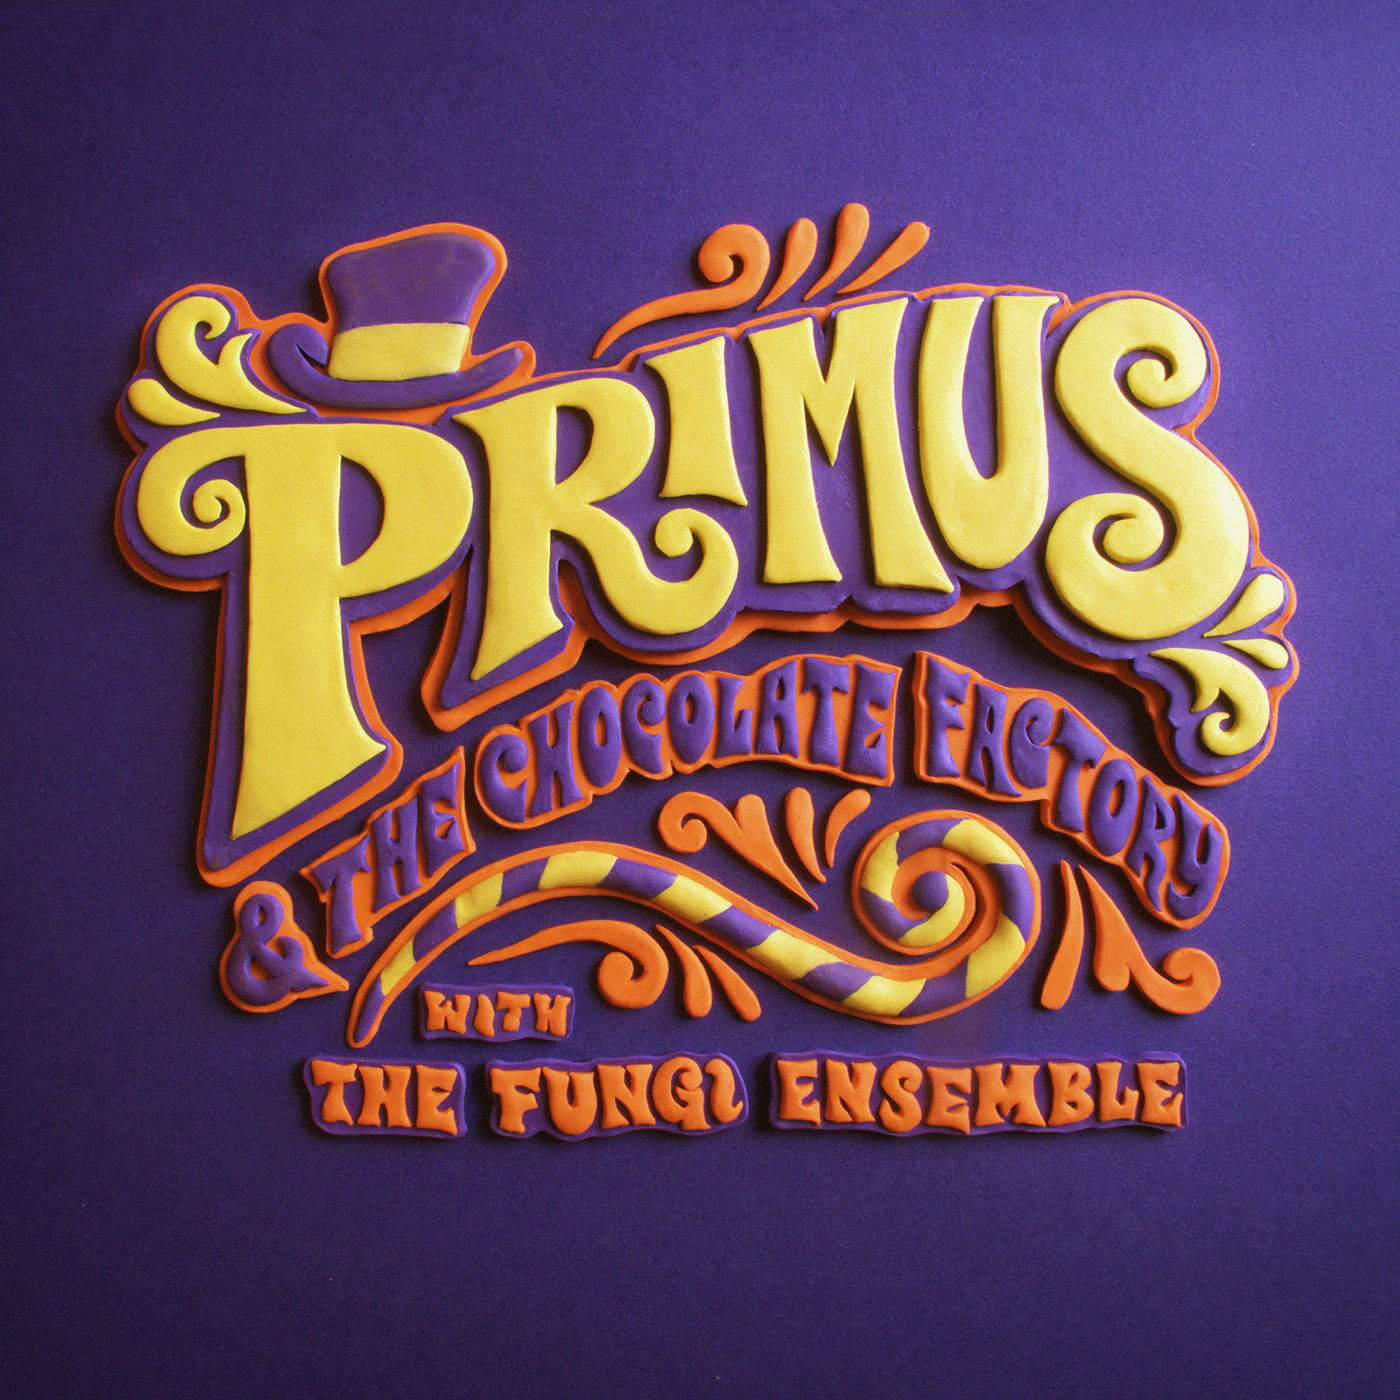 Primus – Primus & the Chocolate Factory with the Fungi Ensemble (2014) [FLAC 24bit/44,1kHz]